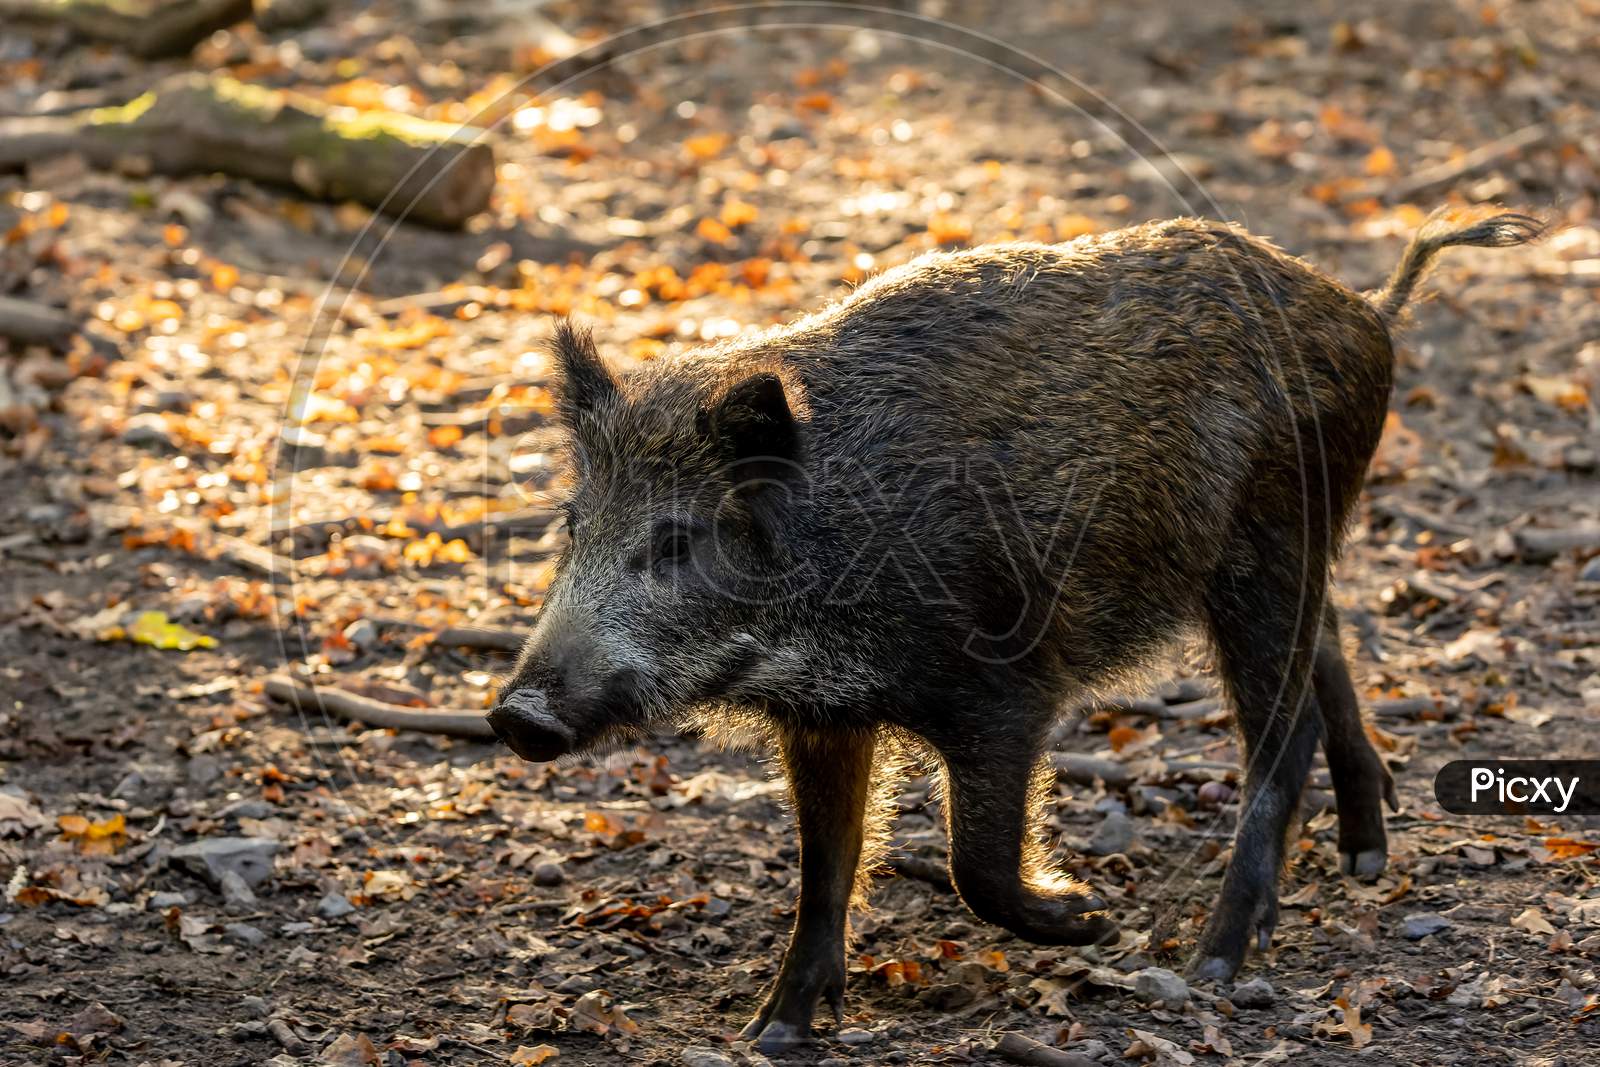 A wild boar walking through a forest in Hesse, Germany at a sunny day in autumn.